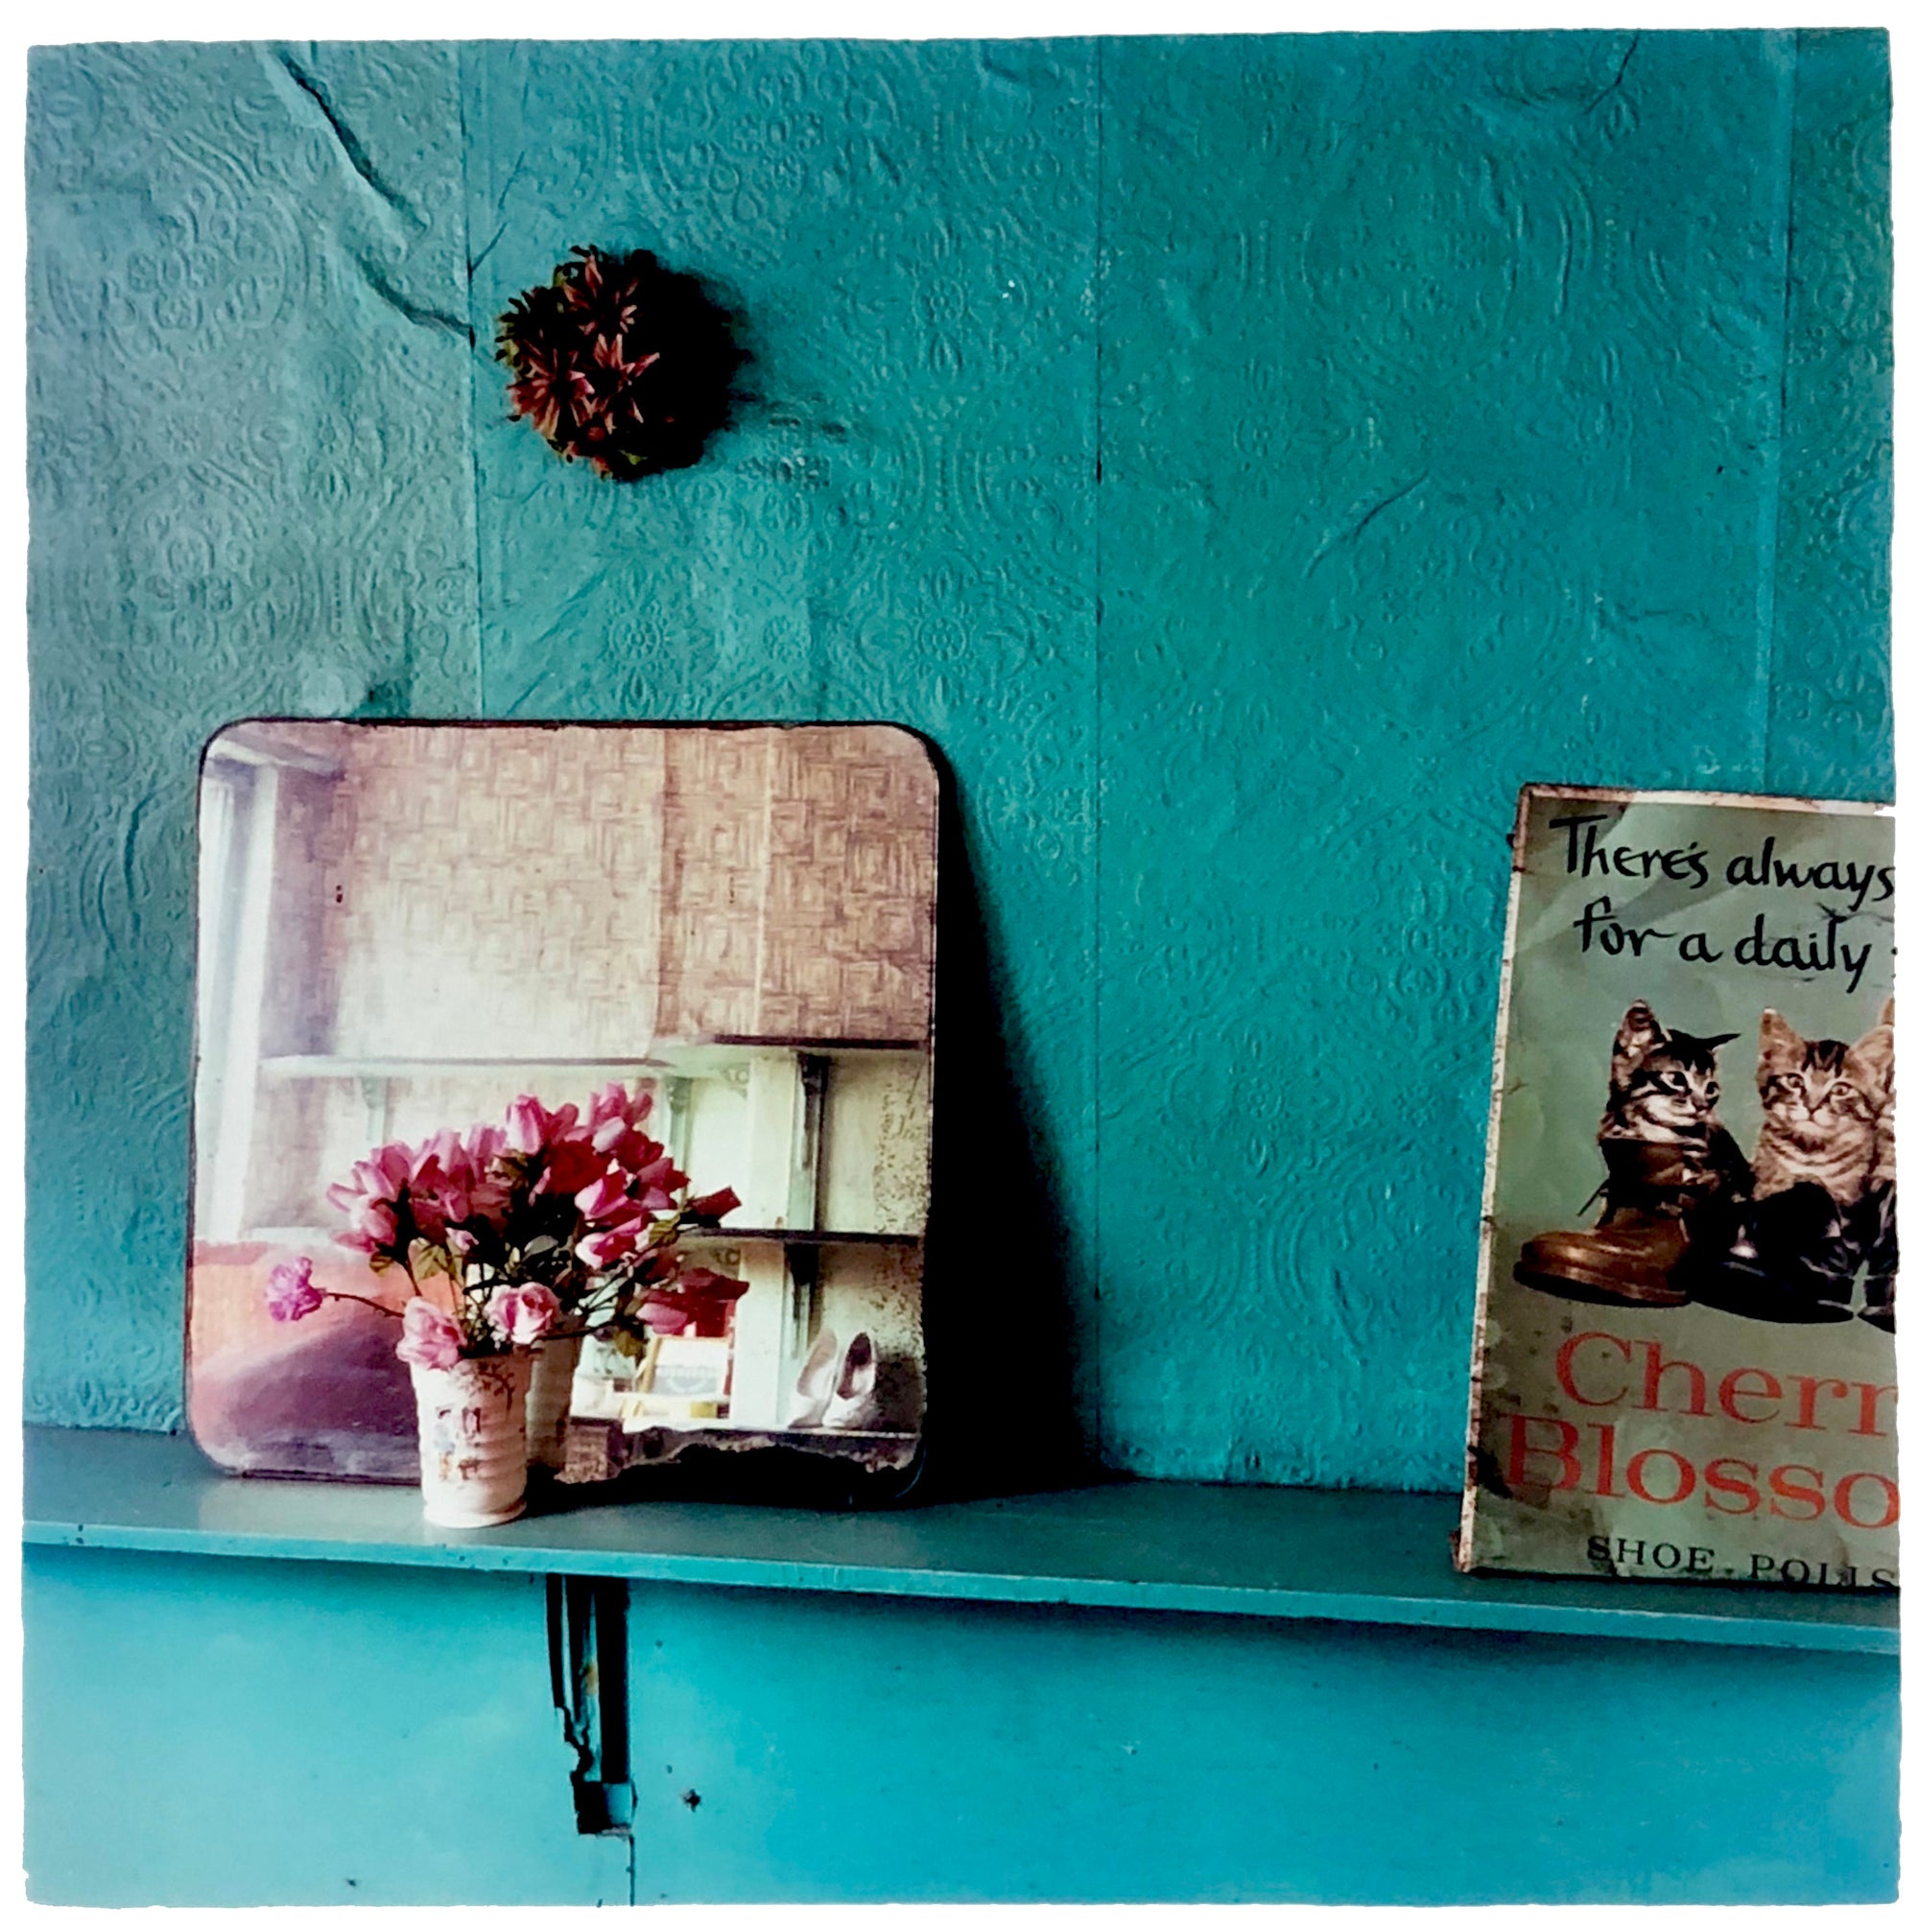 Vintage turquoise interior with flowers, a mirror and a book with cats on the front cover.